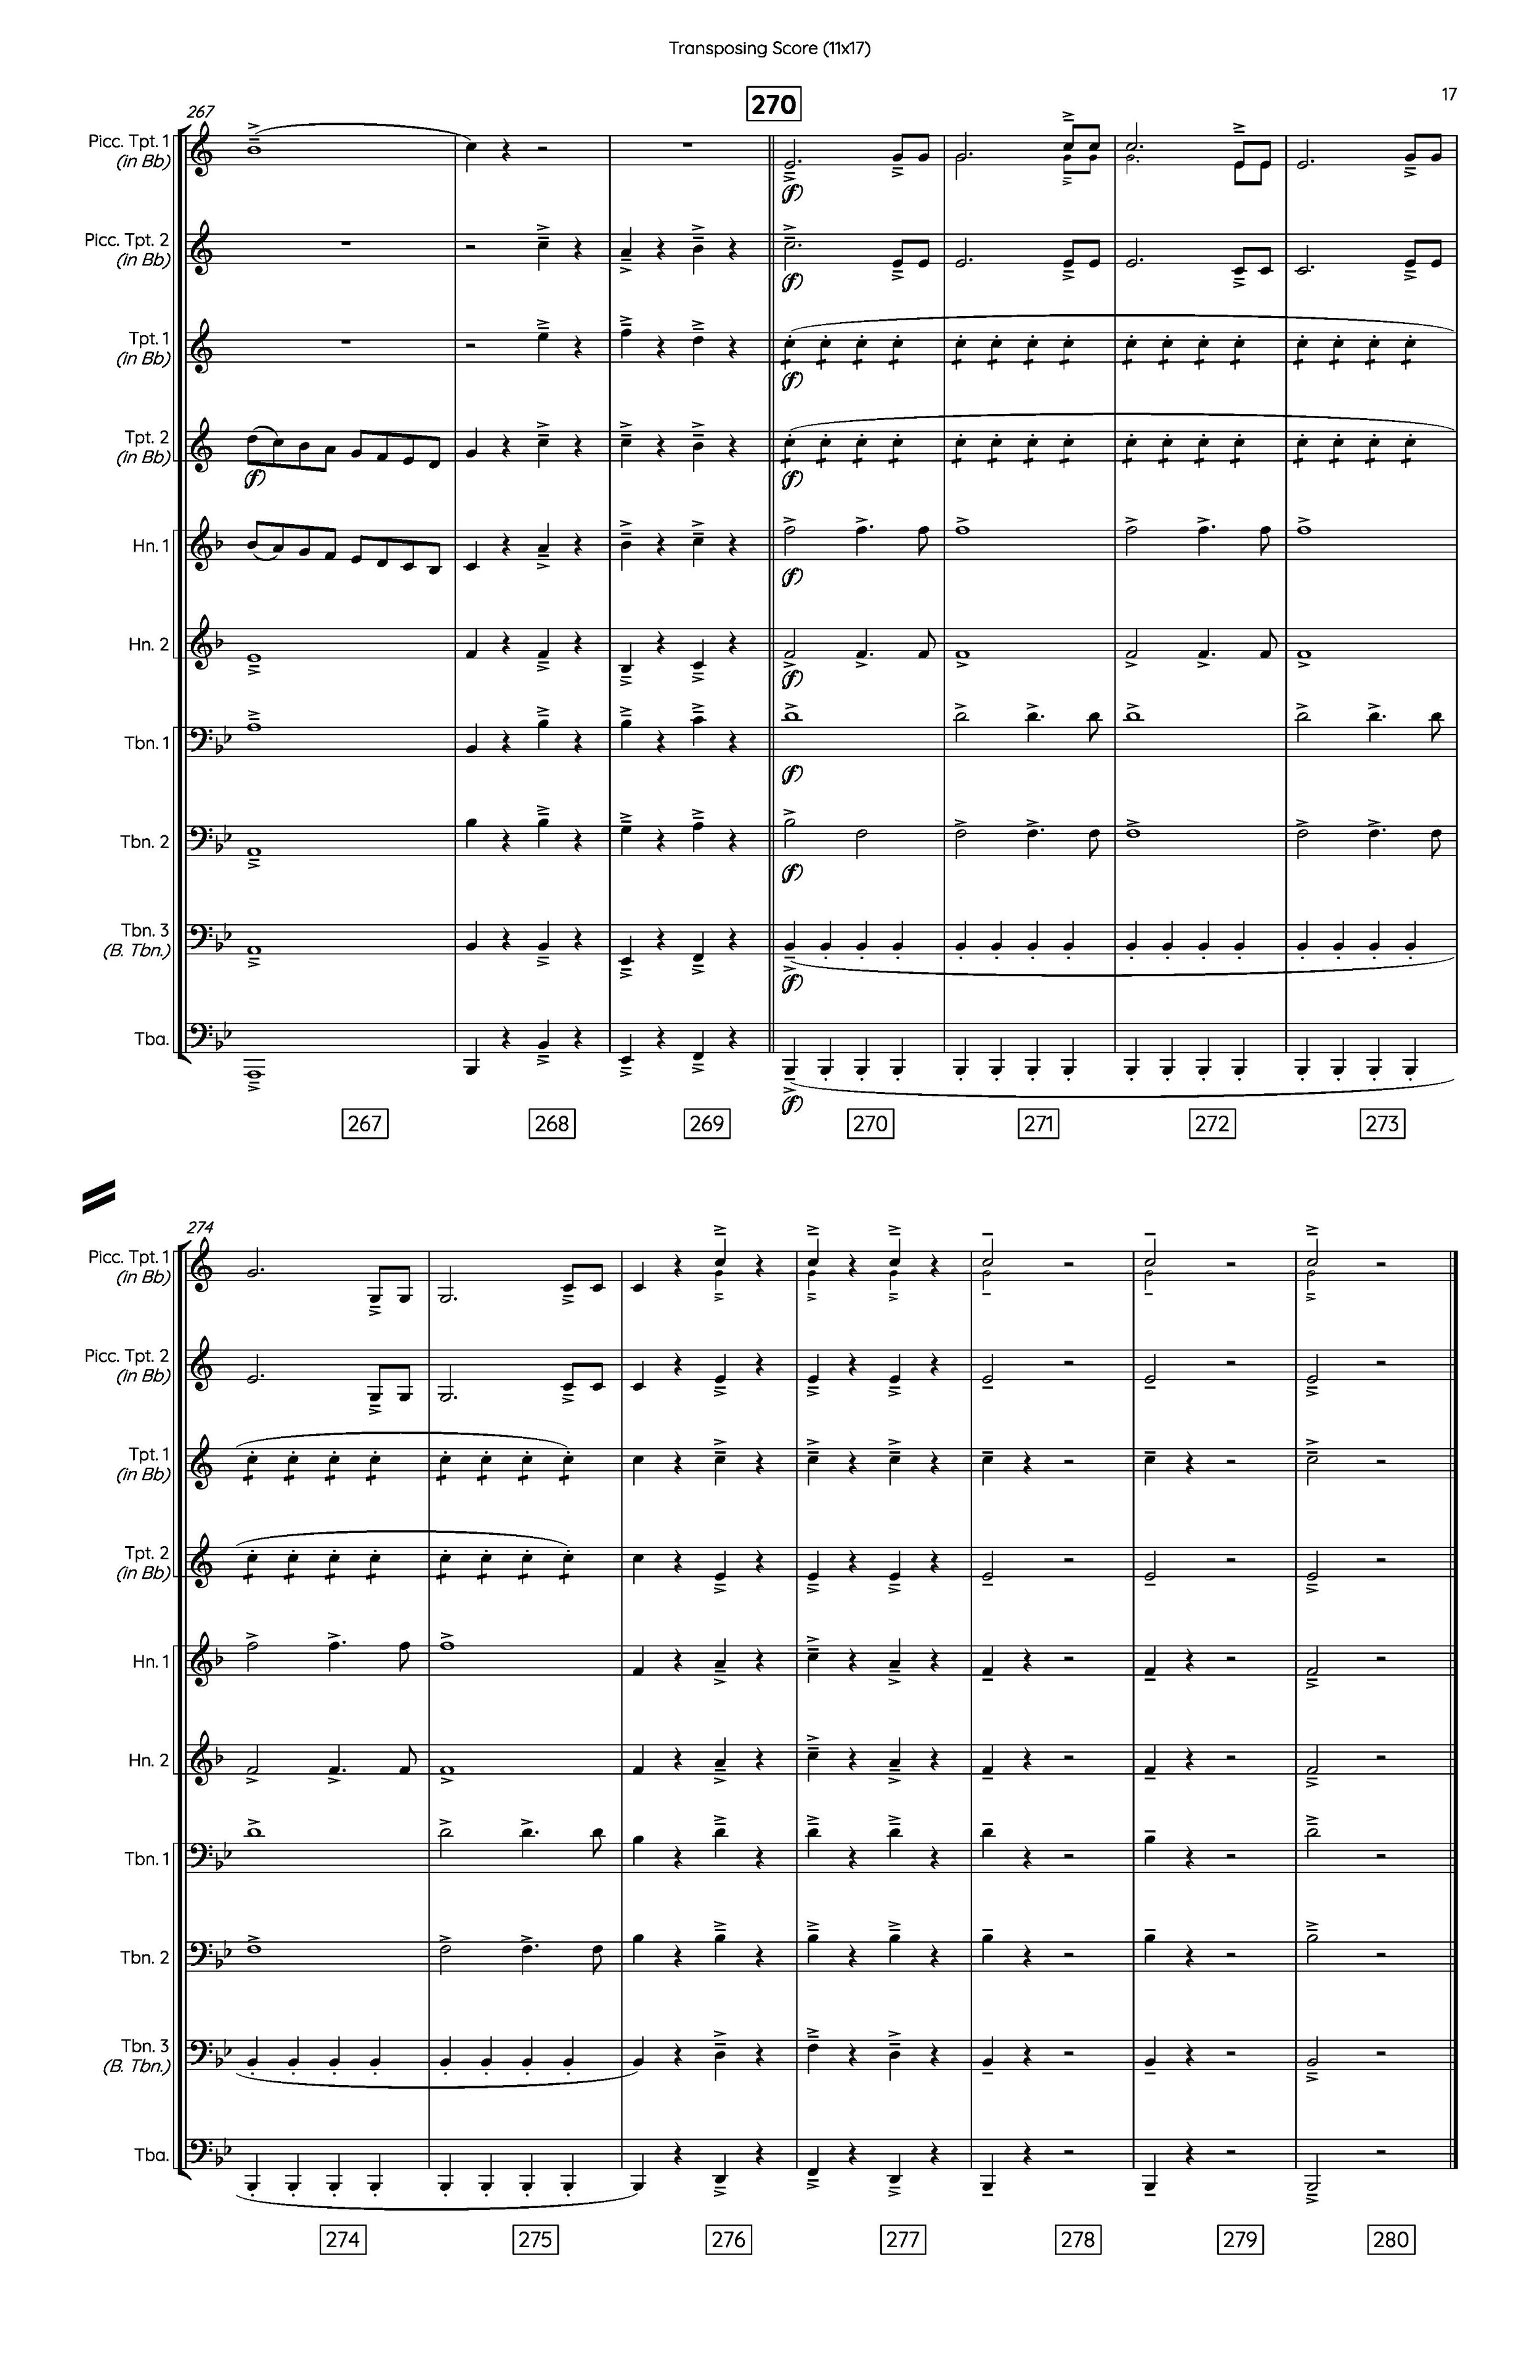 Marriage of Figaro [Brass Ensemble] in Bb - Score 11x17_Page_17.jpg